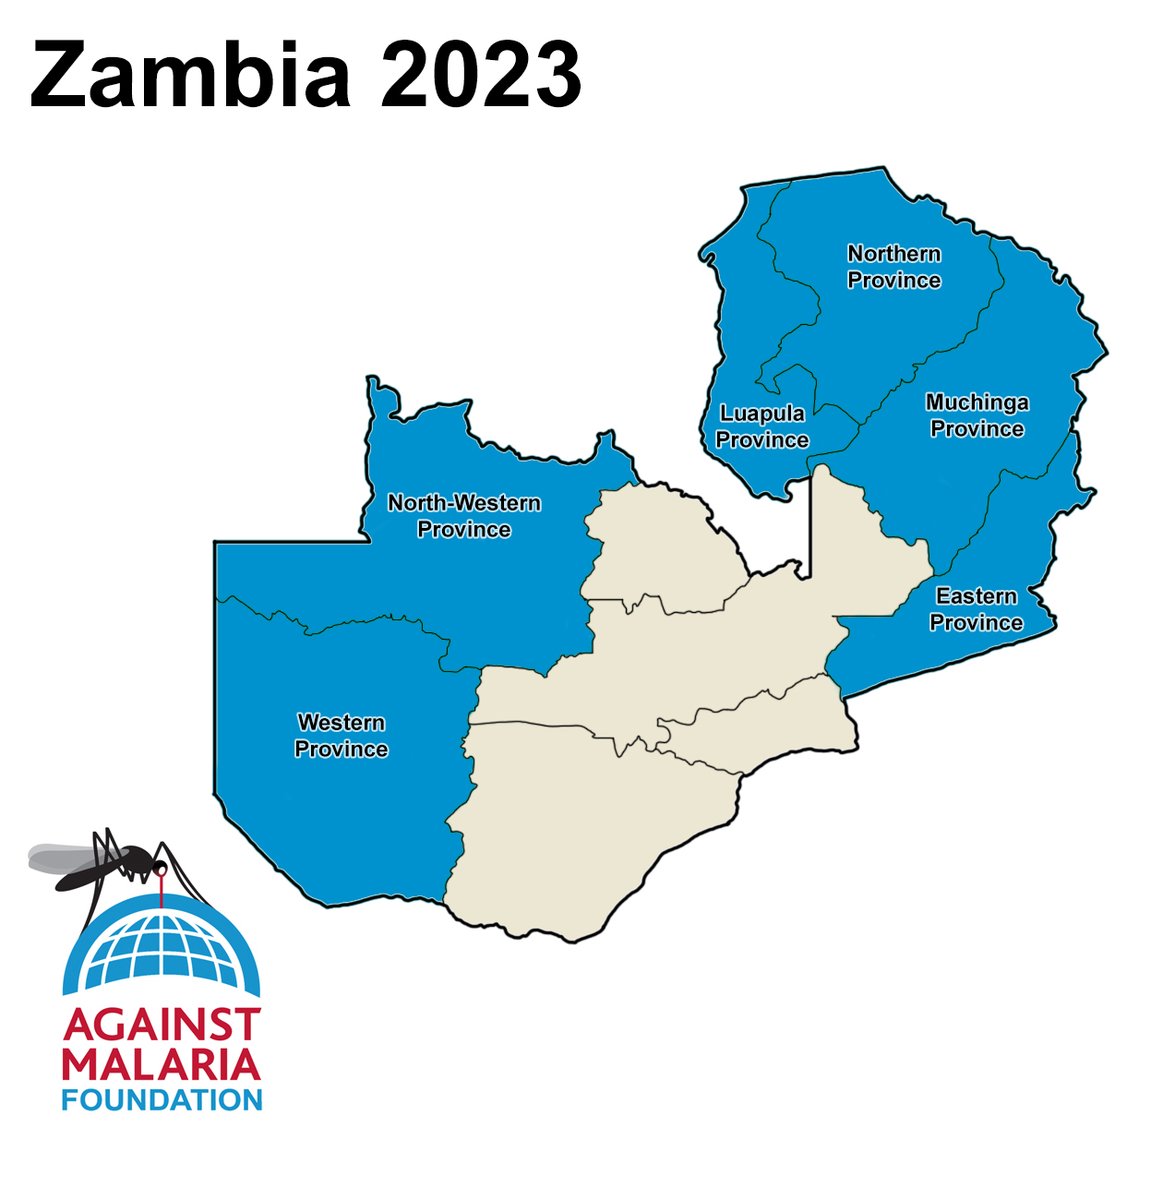 AMF agrees to fund 6.3 million nets for distribution in Zambia in Q3/Q4 2023 #malaria #zambia #bednets